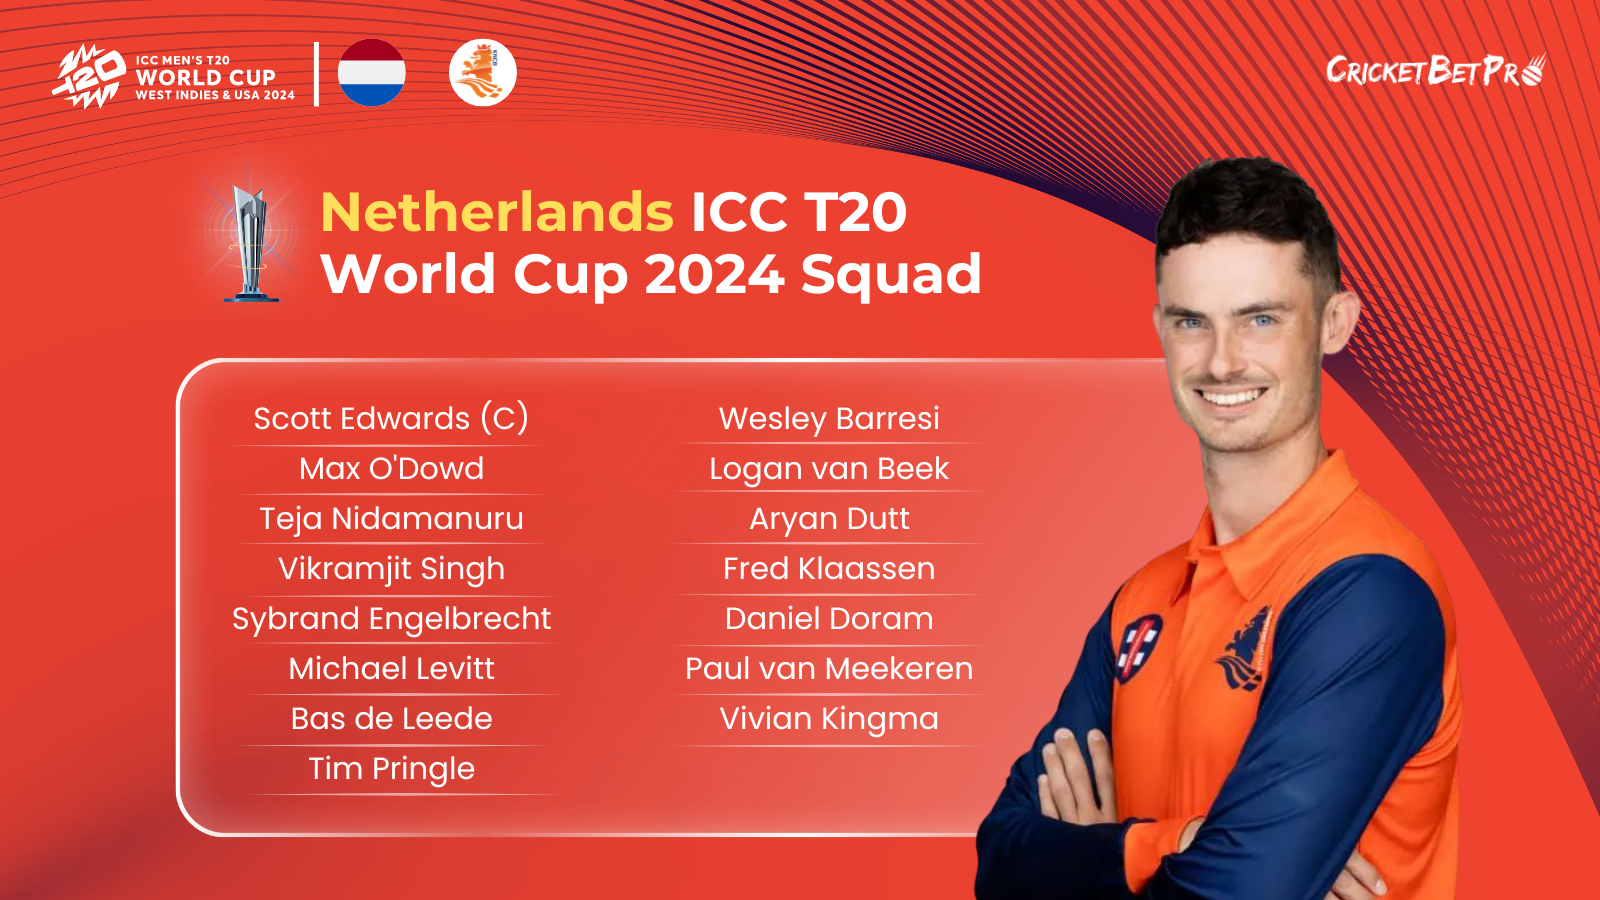 Netherlands-ICC-T20-World-Cup-2024-Squad.png